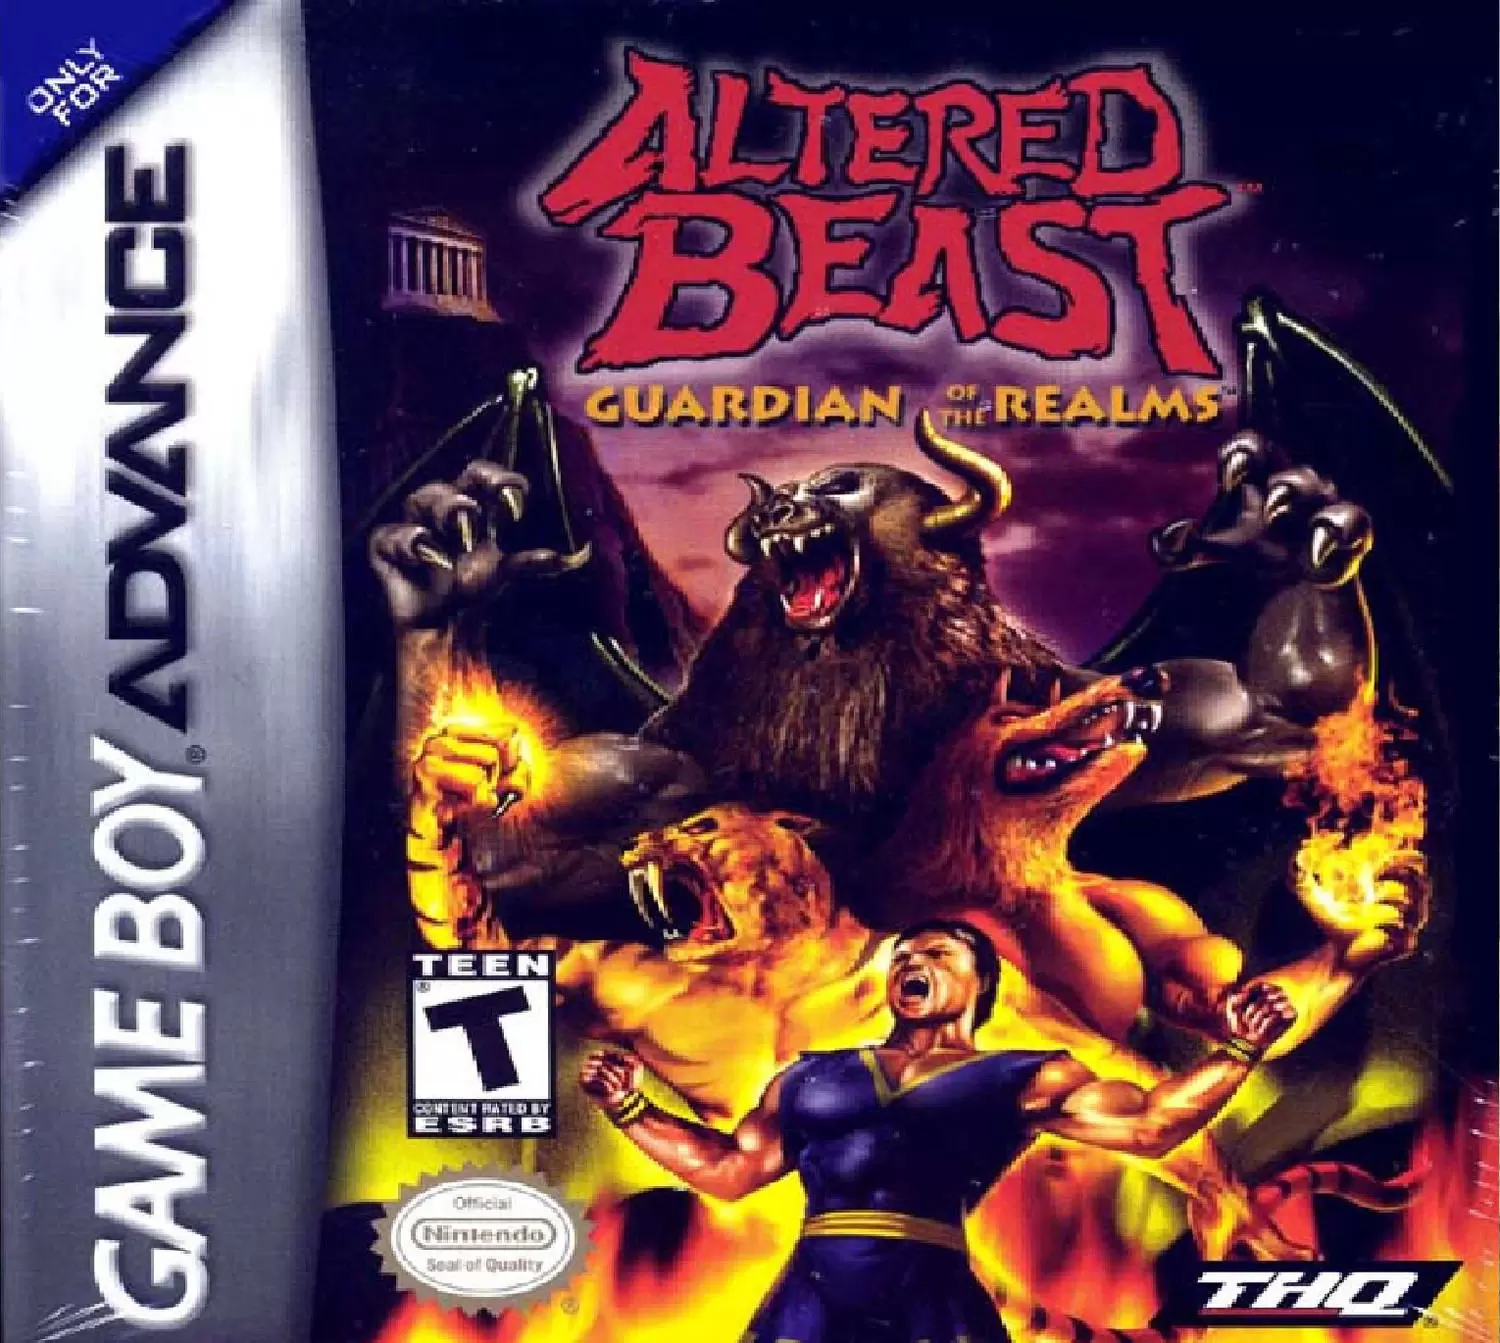 Game Boy Advance Games - Altered Beast: Guardian of the Realms